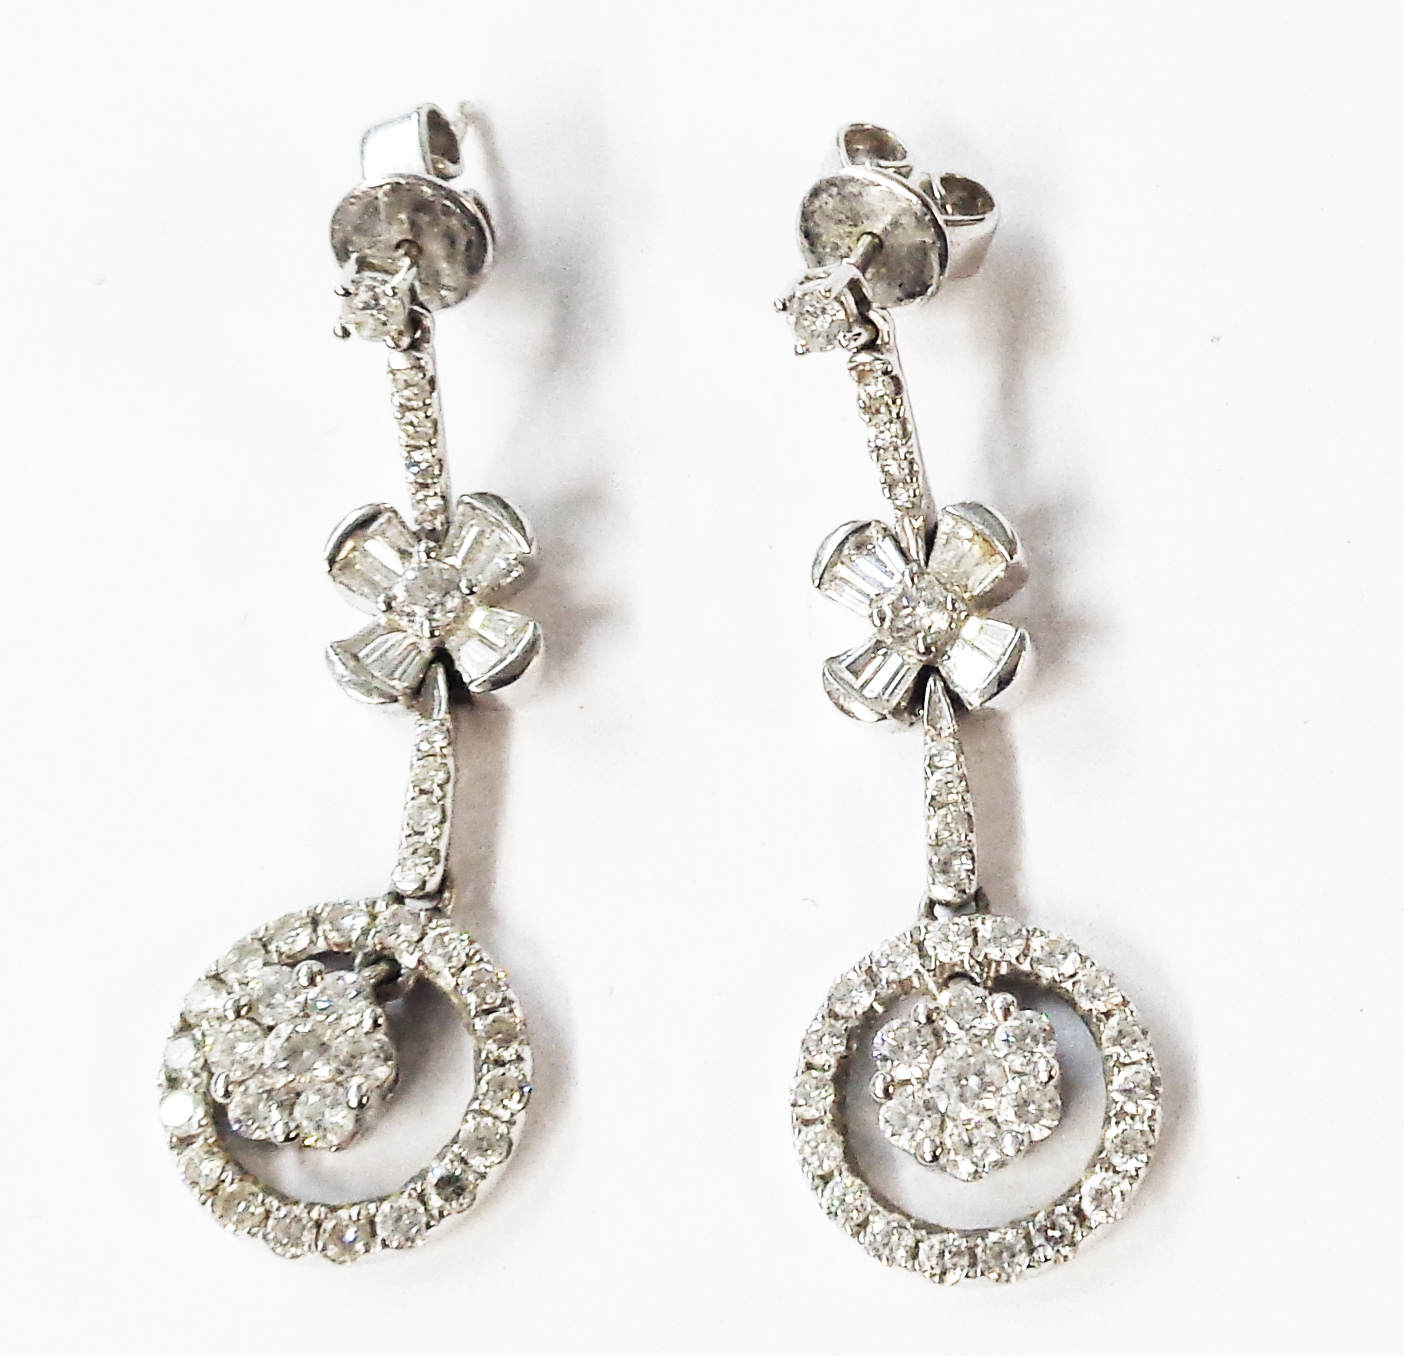 A pair of modern 1920's style 750 (18ct.) white gold diamond encrusted drop earrings with free